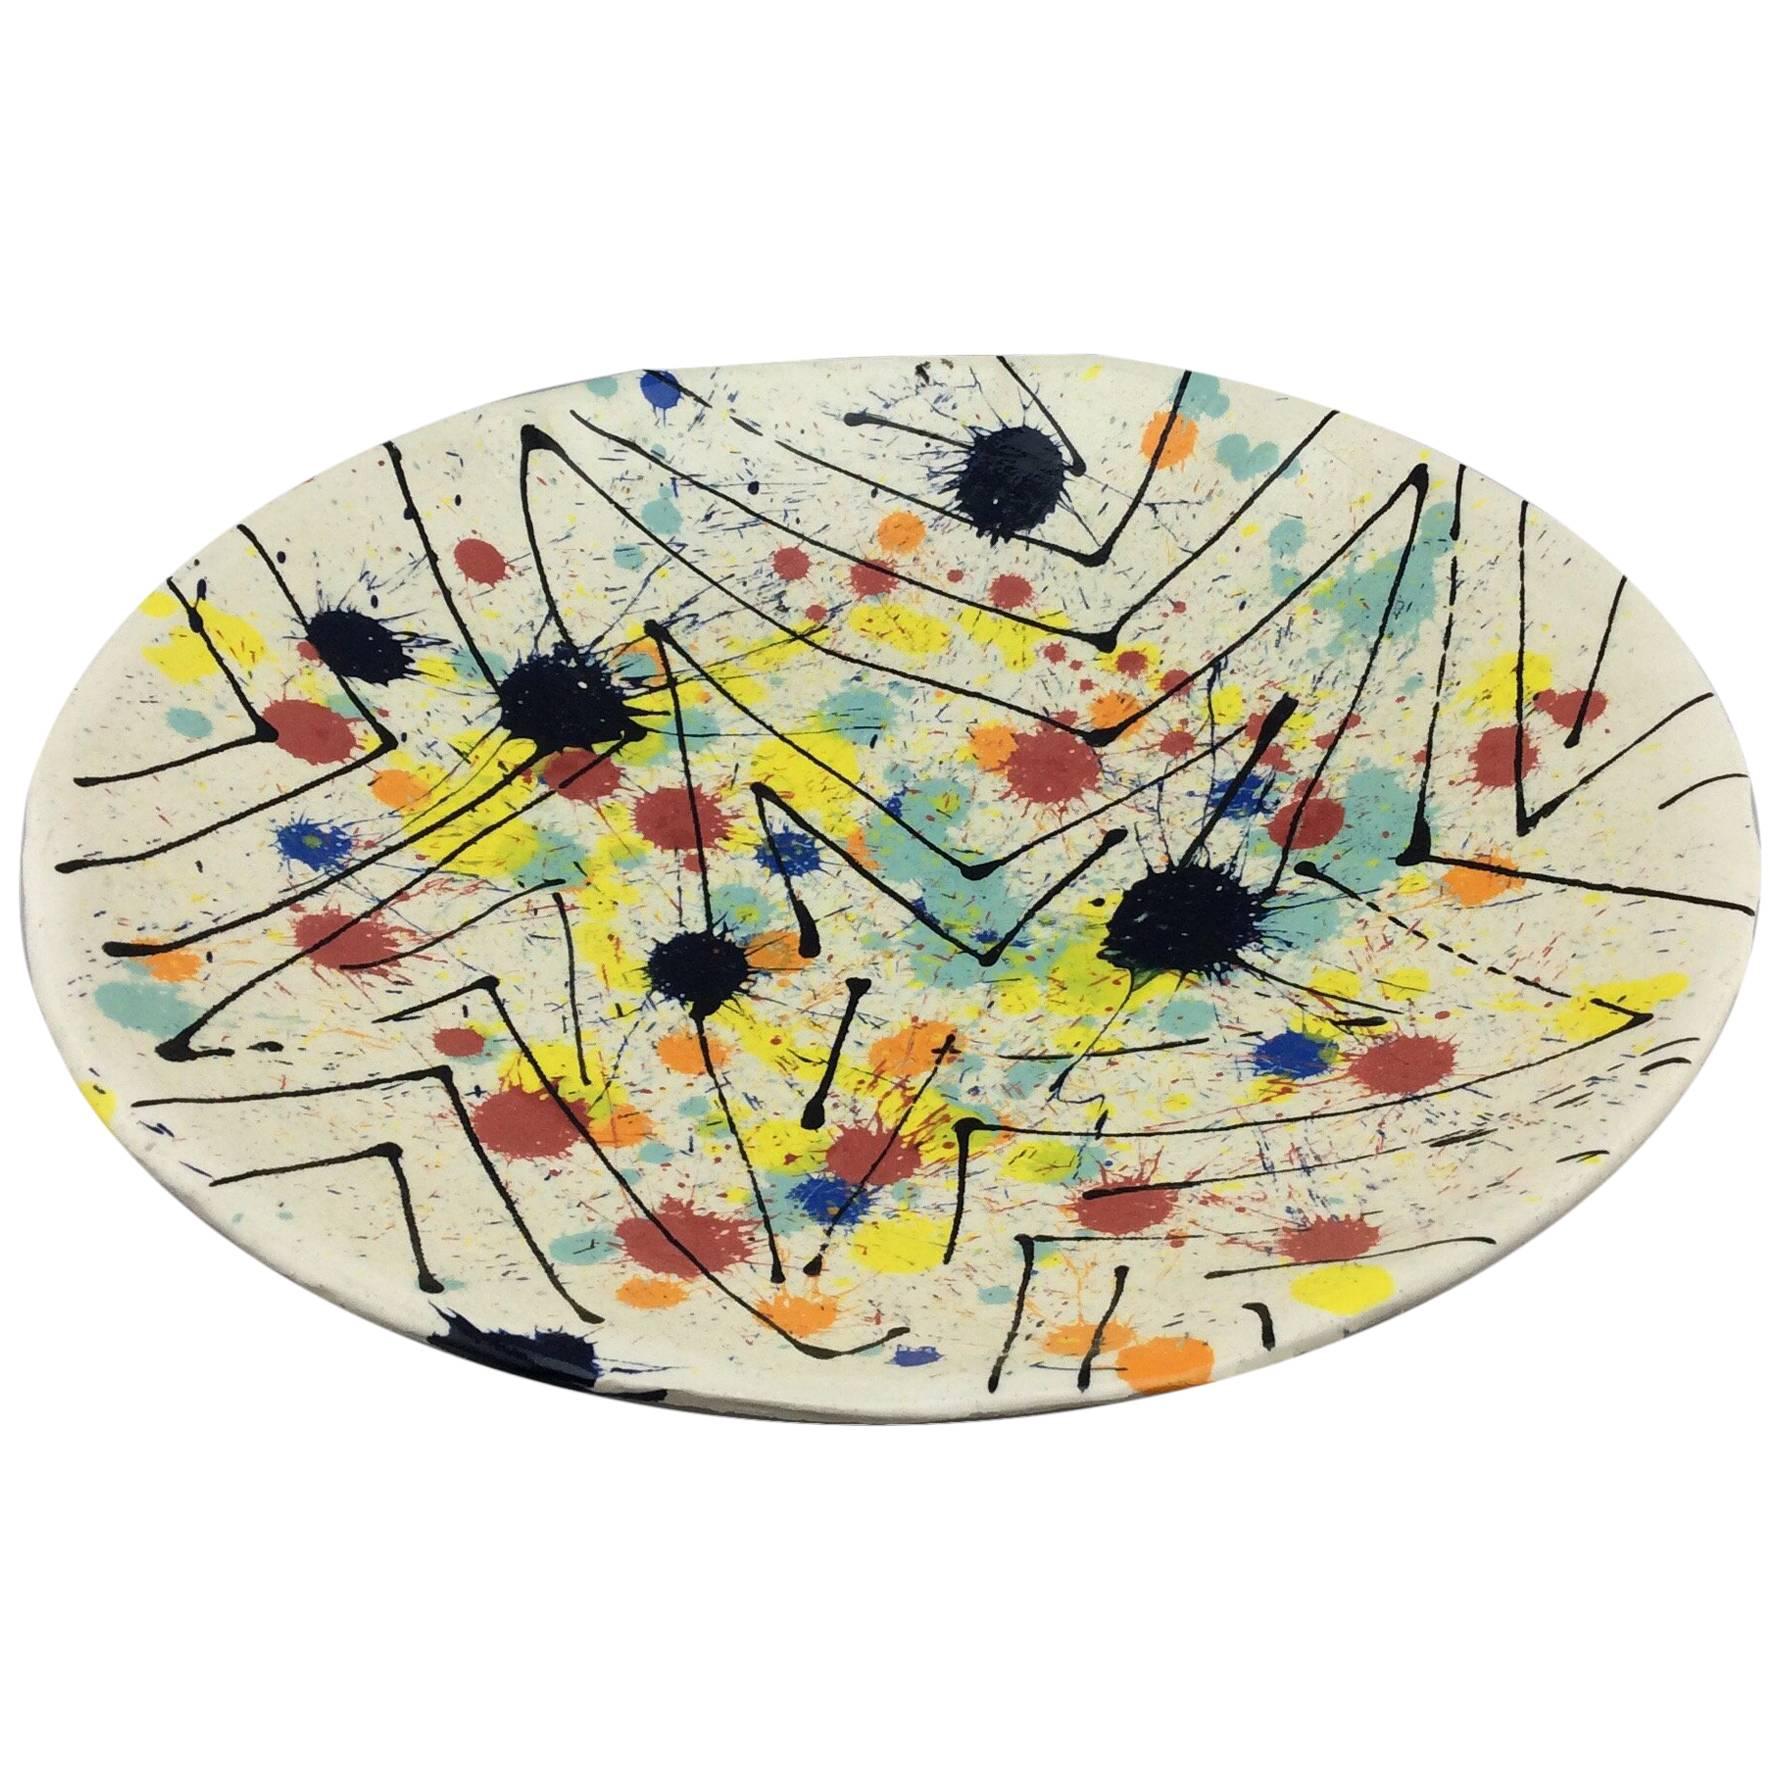 Large Vintage Abstract Studio Pottery Platter, Signed and Dated 1972